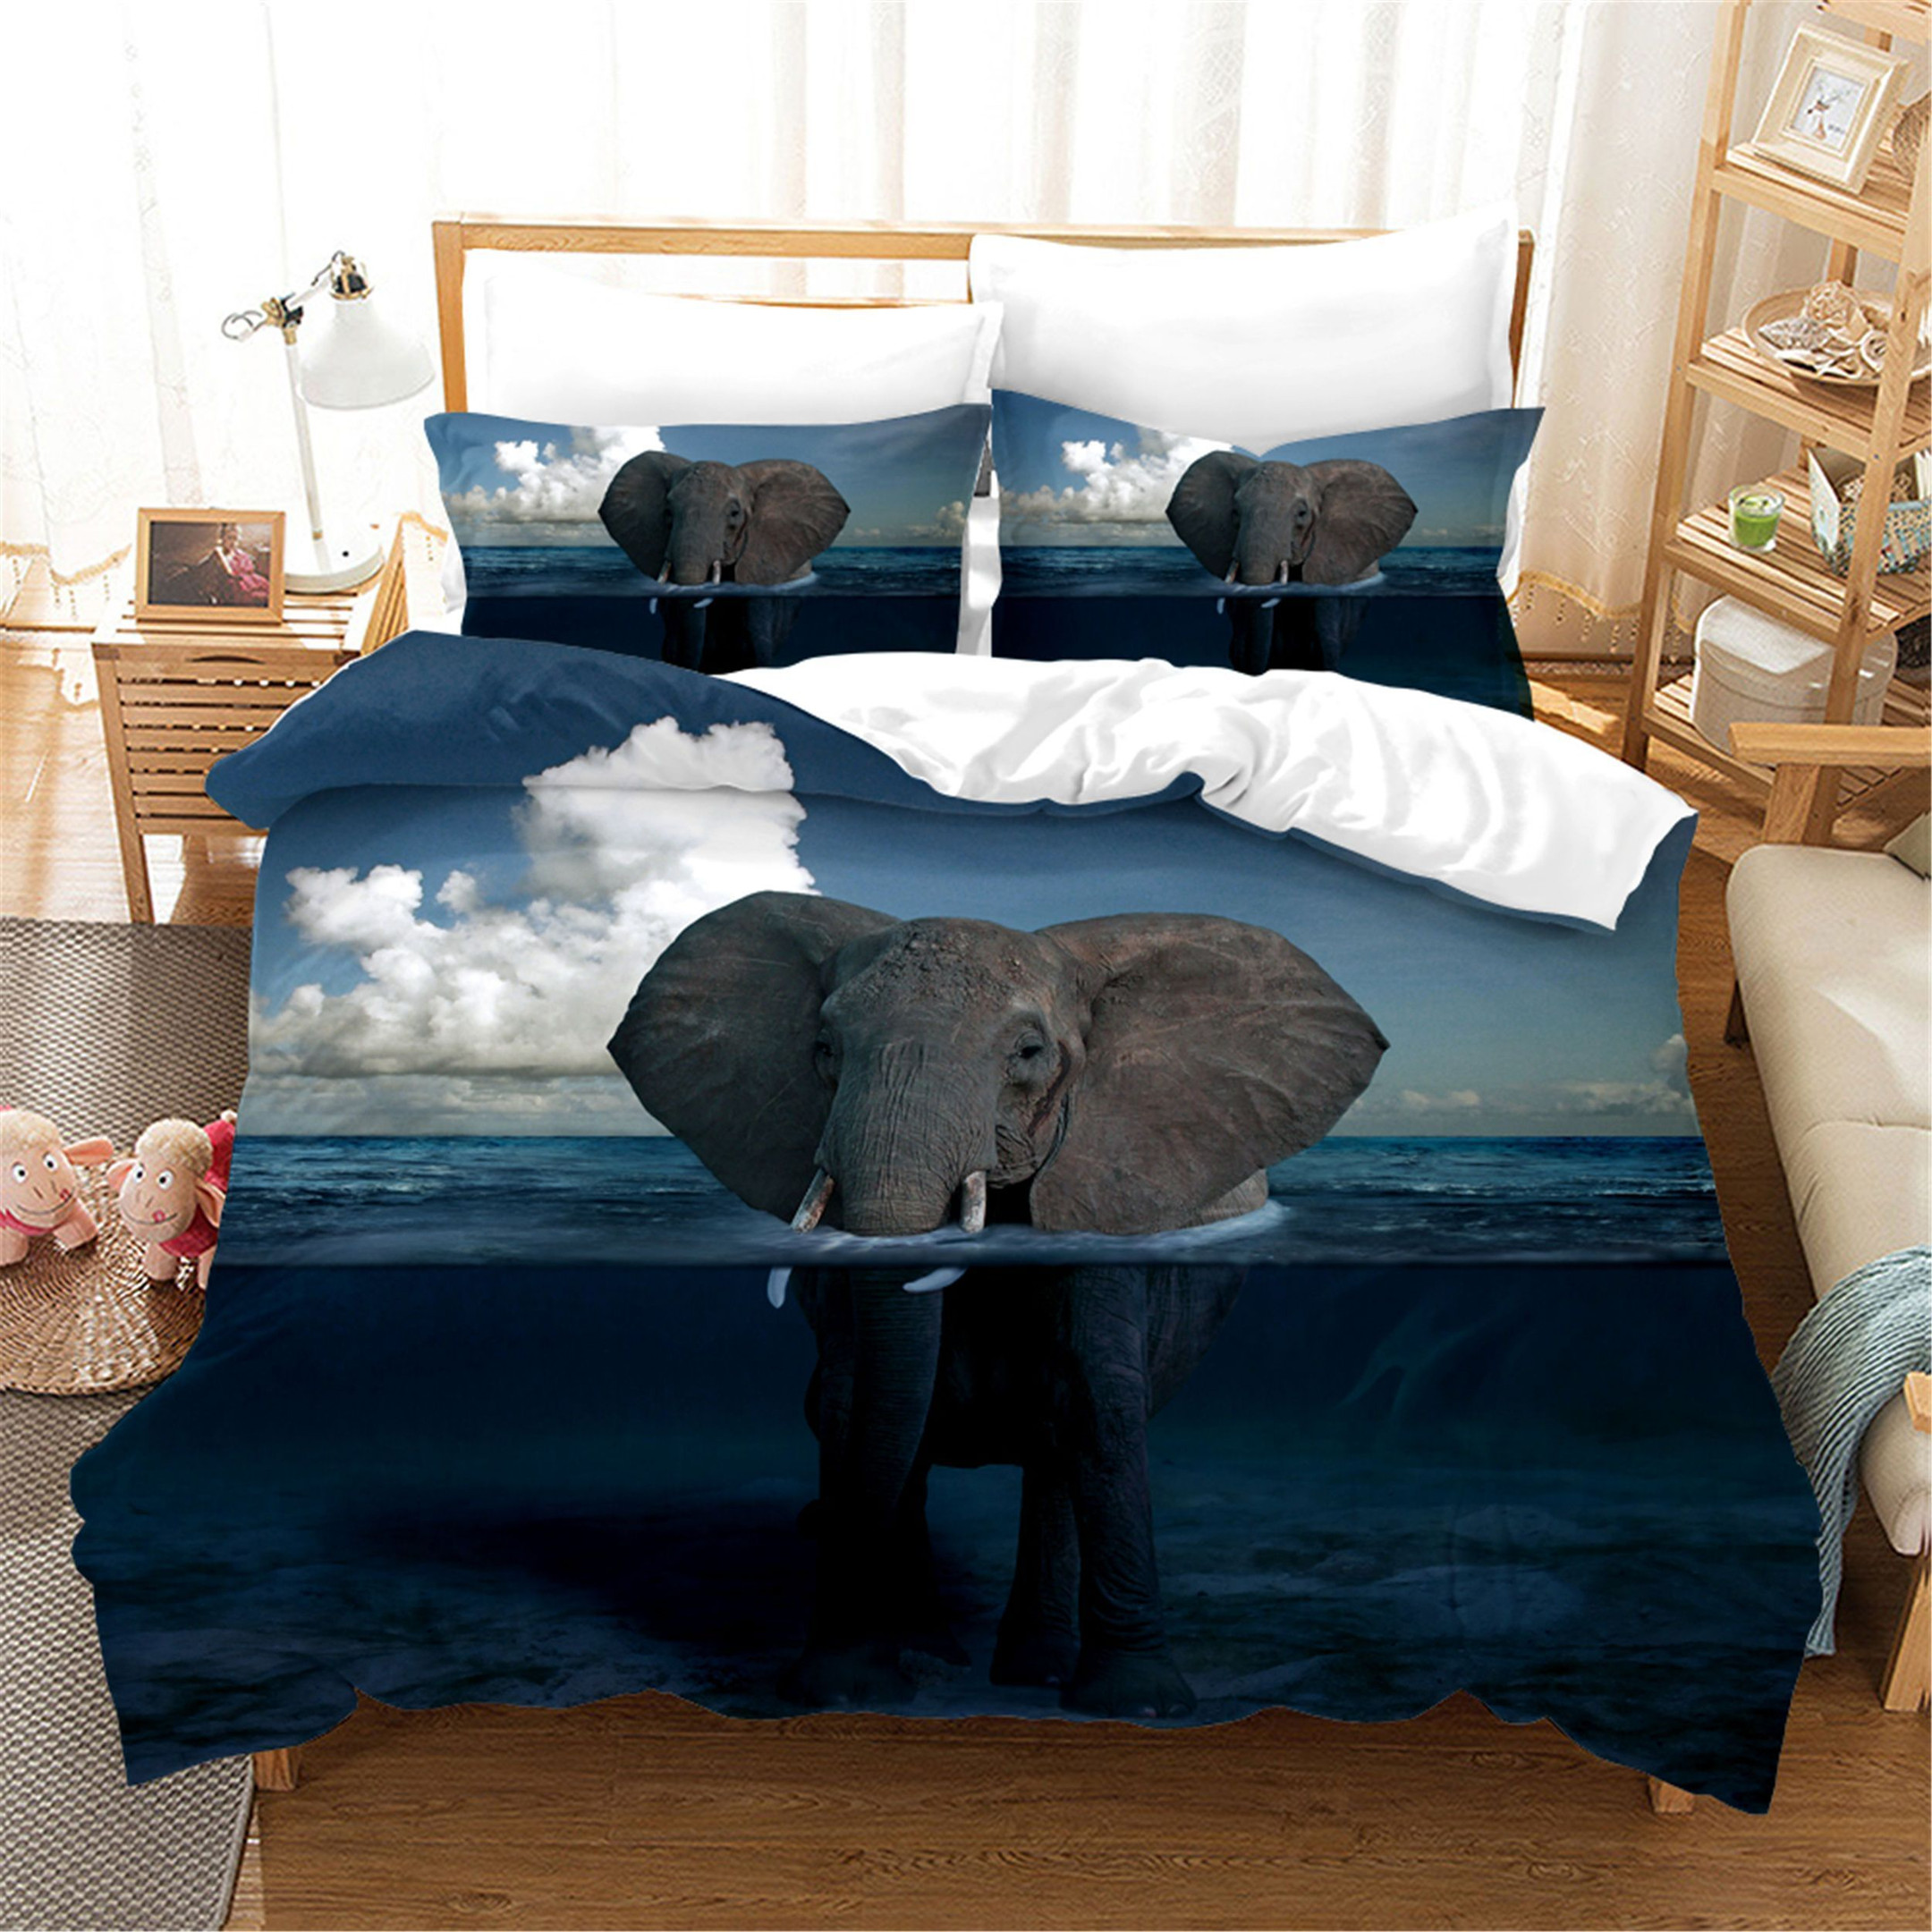 3d elephant ocean bedding sets with sheets and duvet cover tpifp